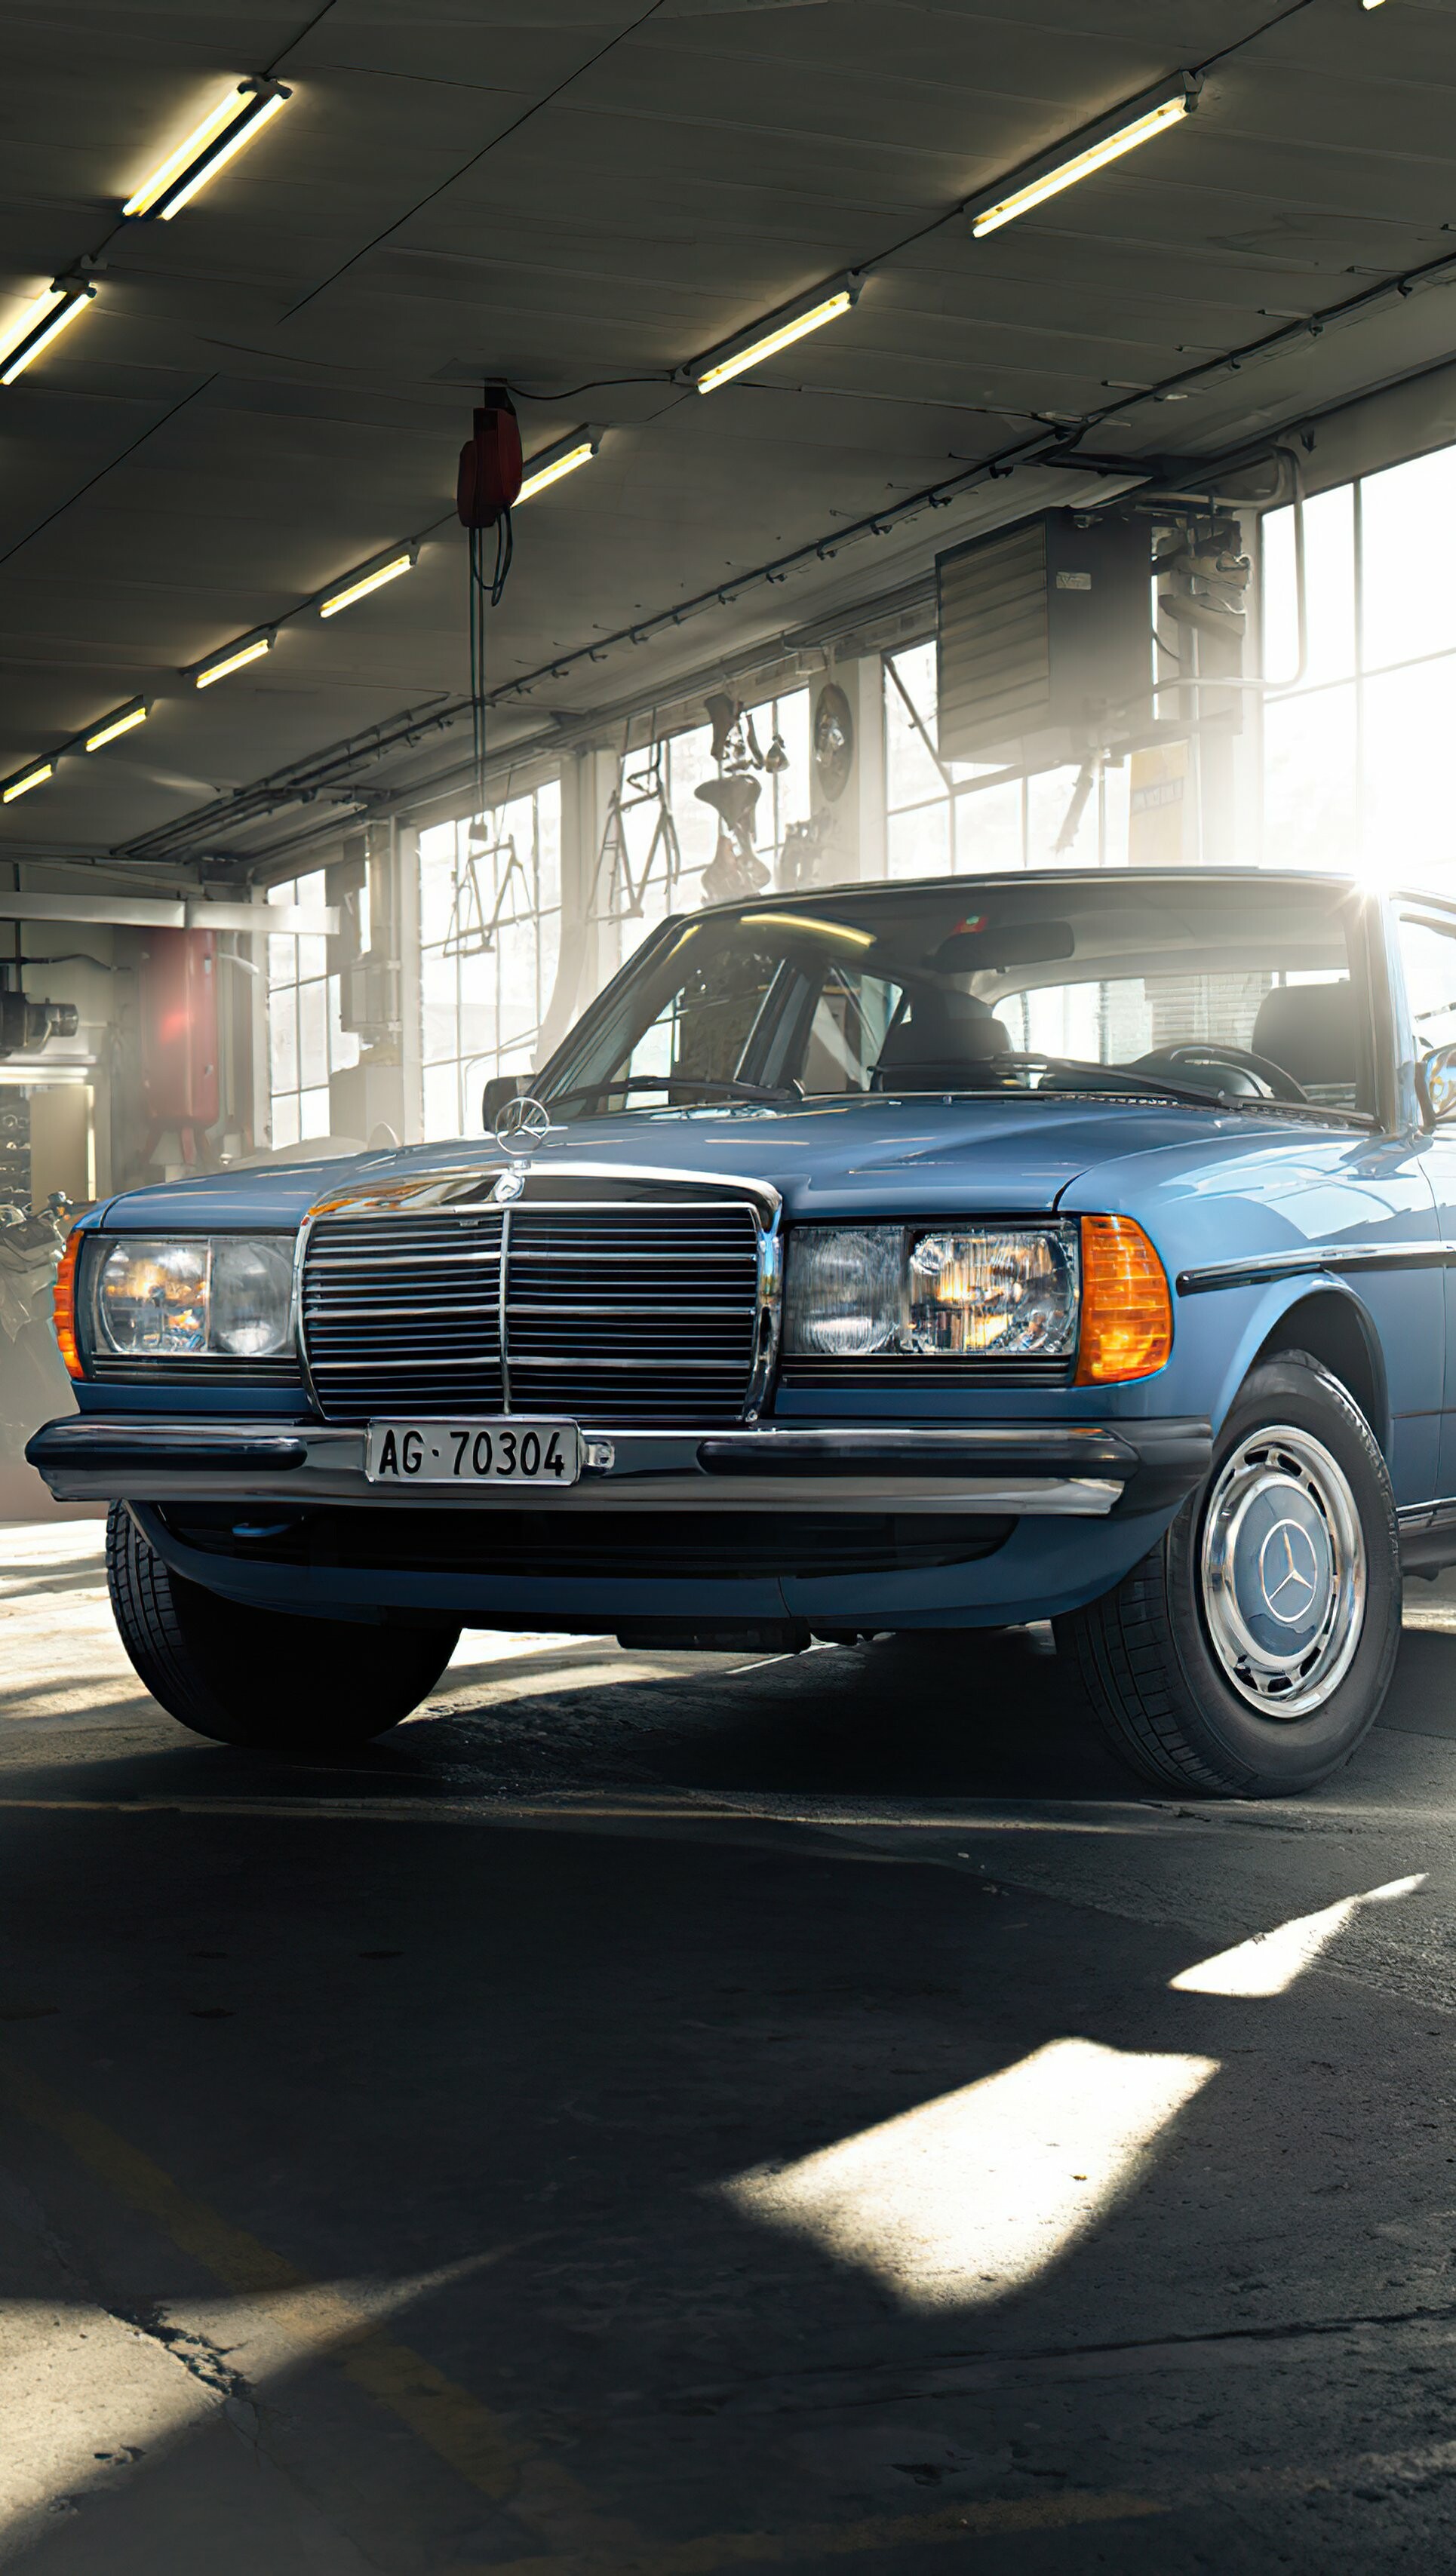 Mercedes-Benz: W123 Classic car, The company has Joint venture in Naberezhnye Chelny, Russia (jointly Kamaz). 1930x3420 HD Background.